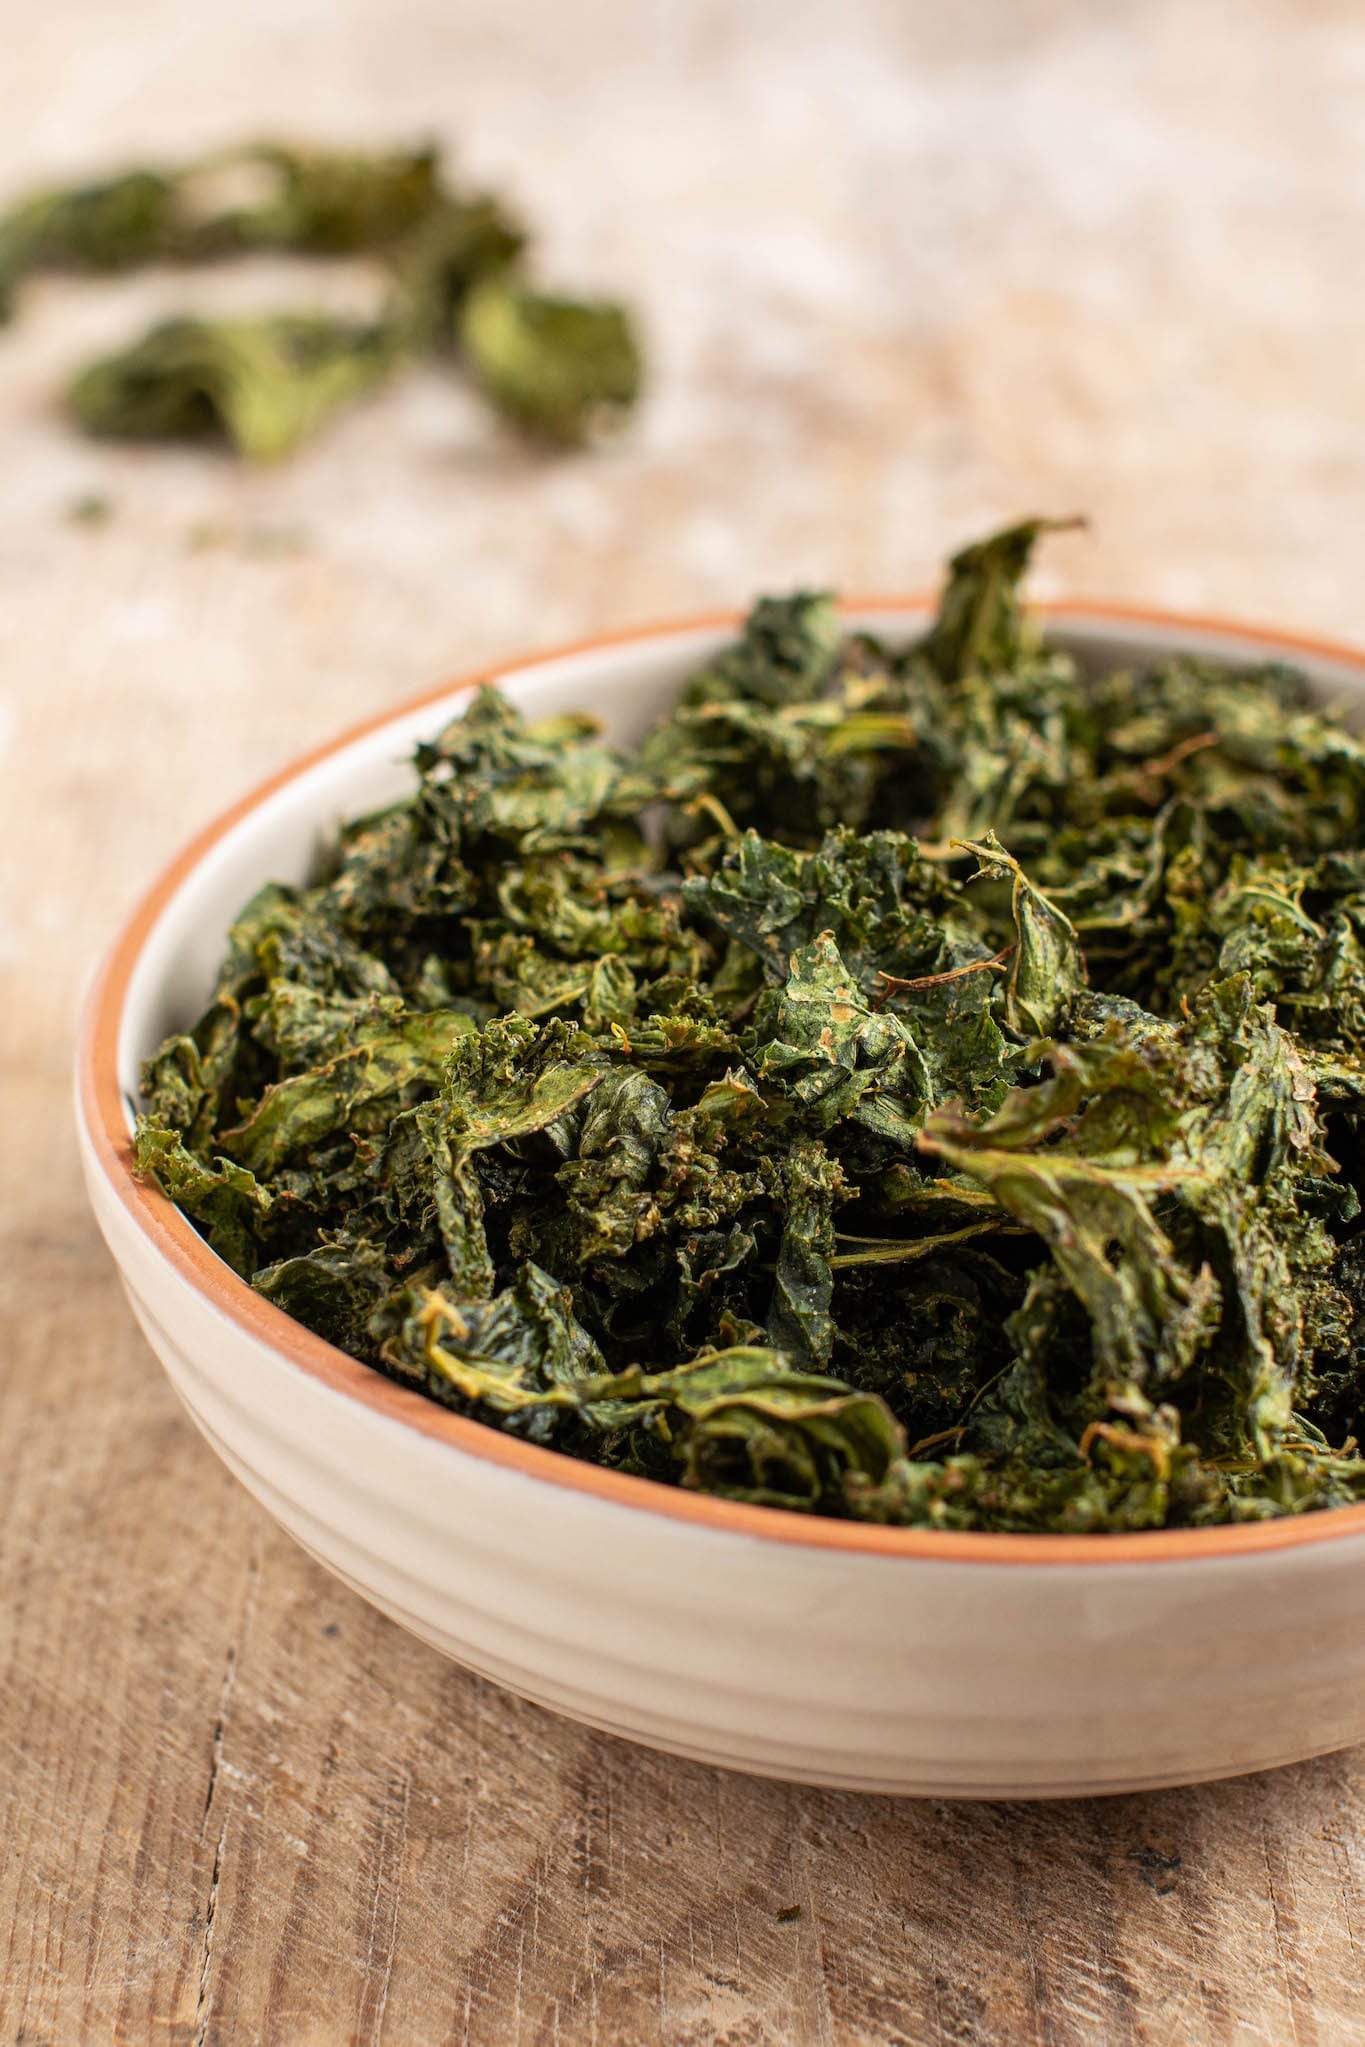 Try those delicious baked kale chips that are also oil-free. It’s a great recipe for a healthy snack instead of potato chips for when you crave something crispy and a bit salty